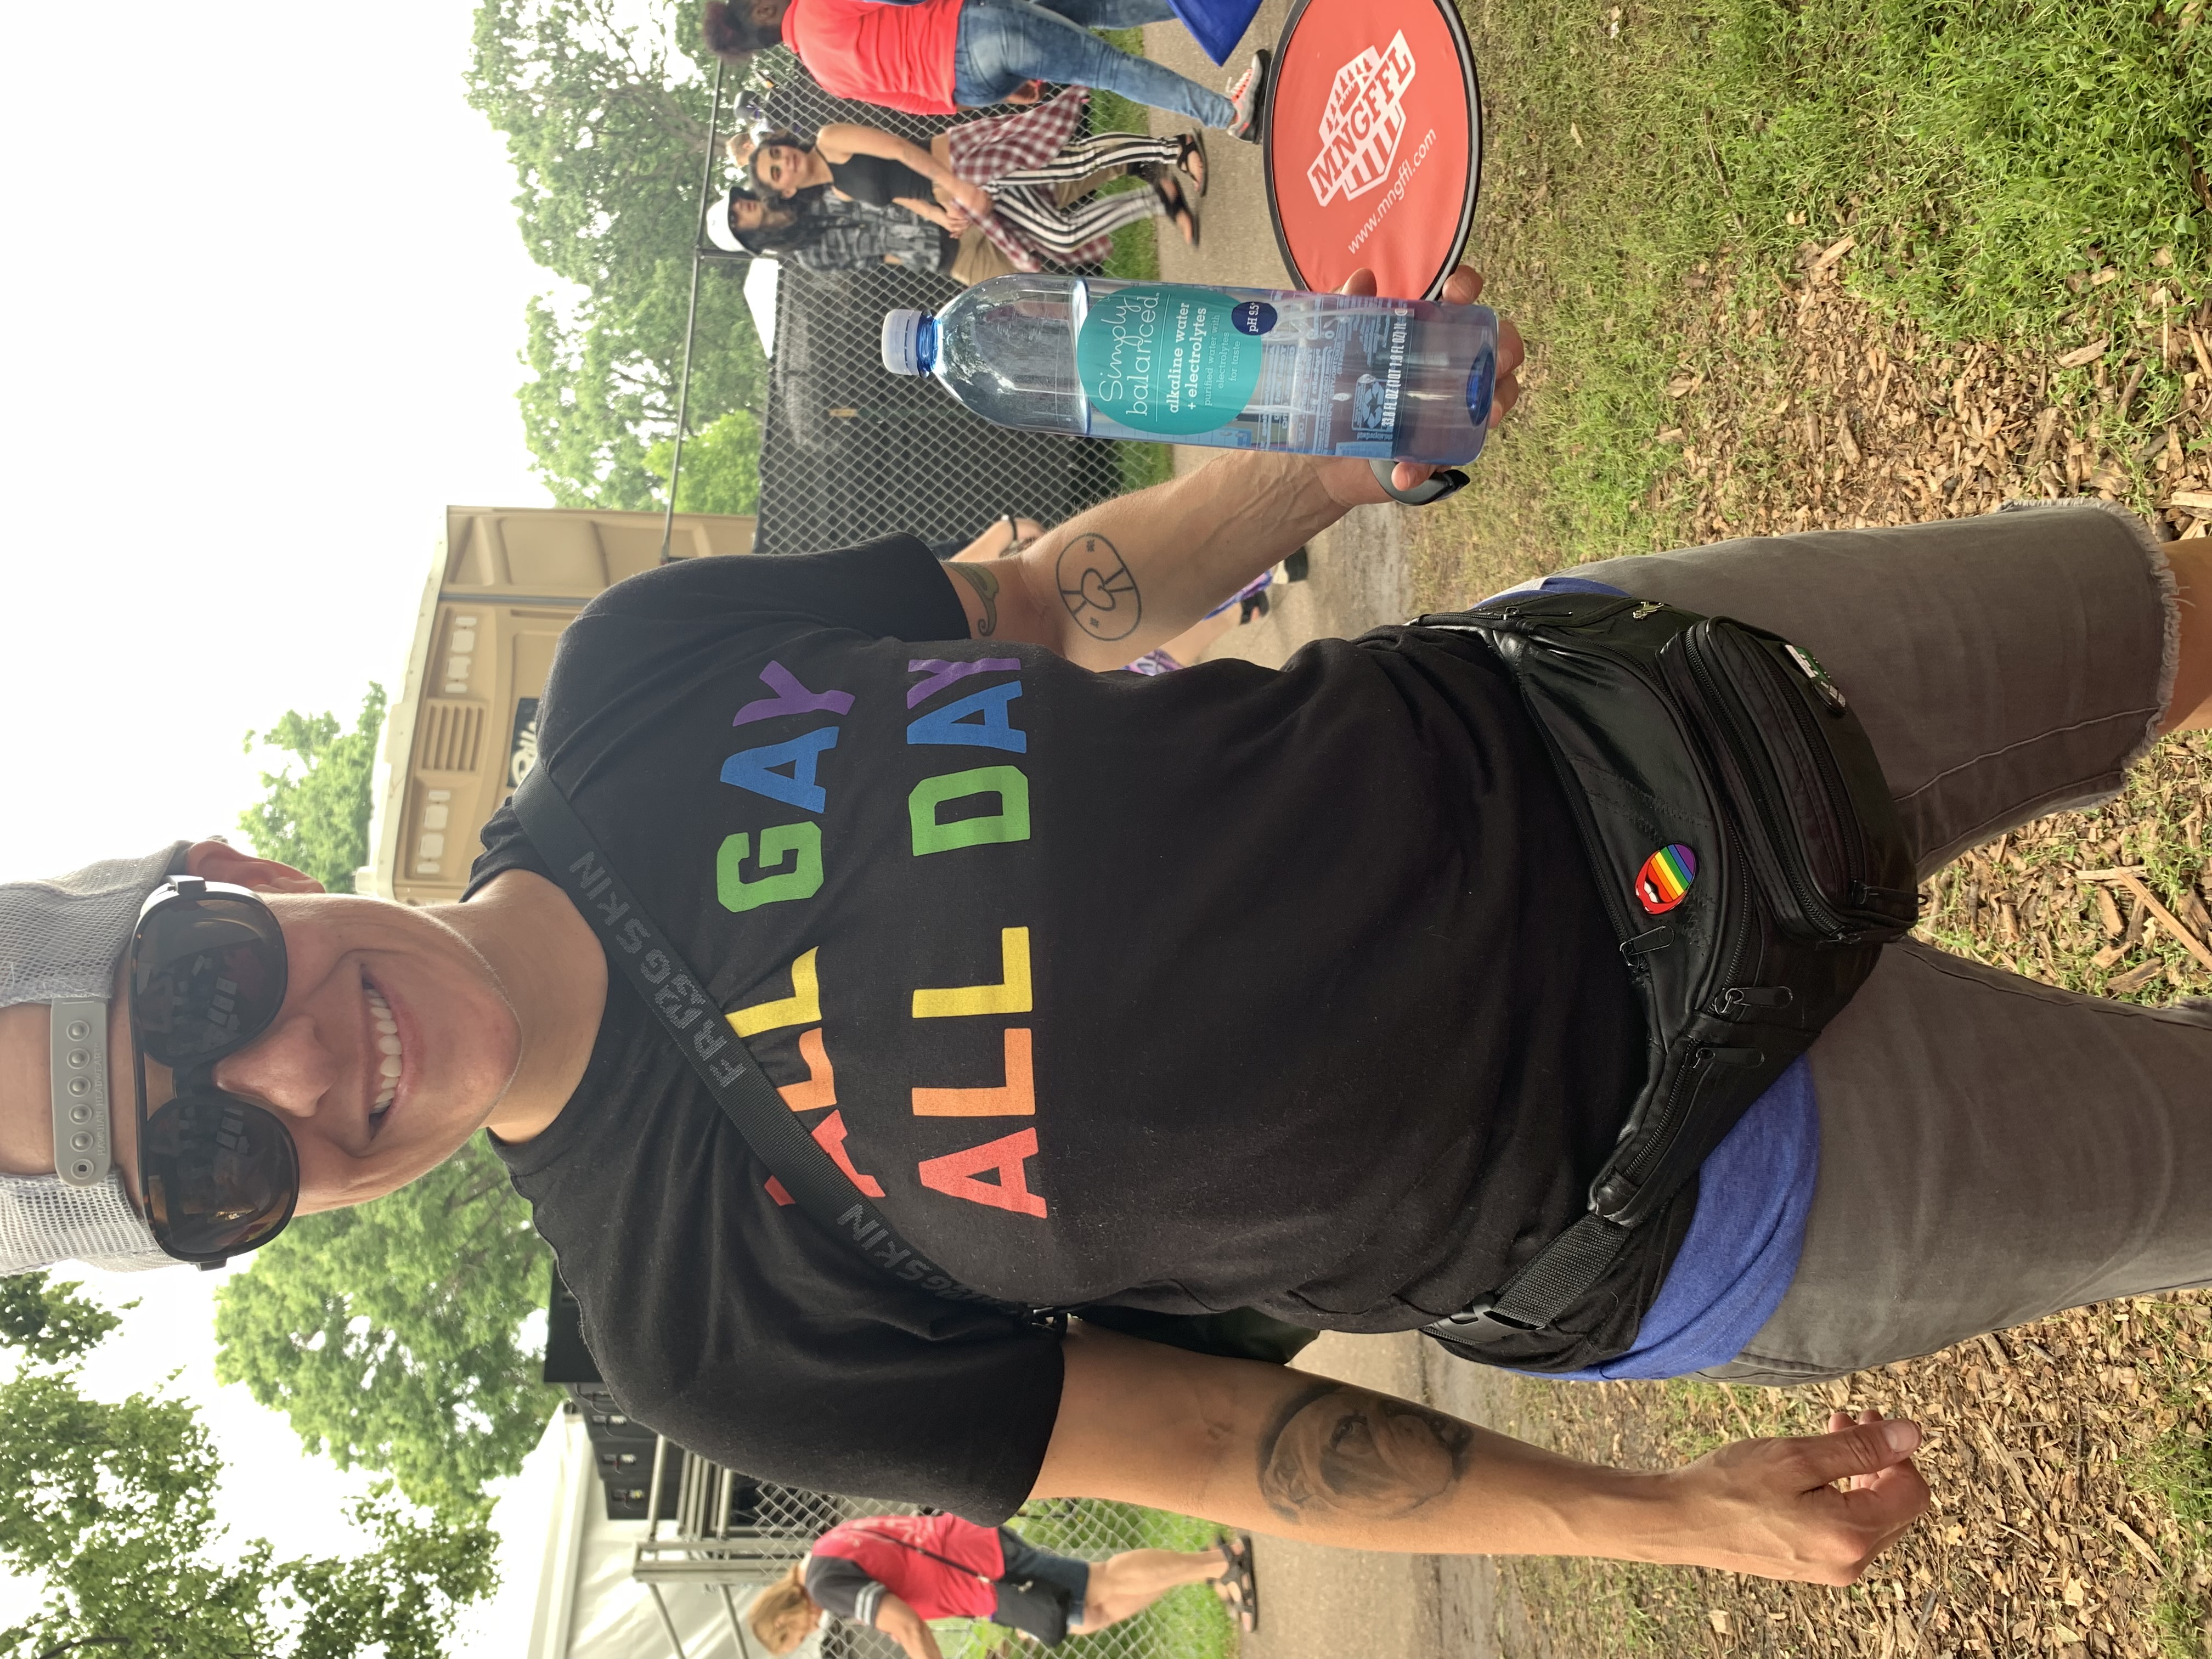 Twin Cities Pride attendee sports their rainbow pride pin from Queen On The Scene vendor shop attending Twin Cities Pride